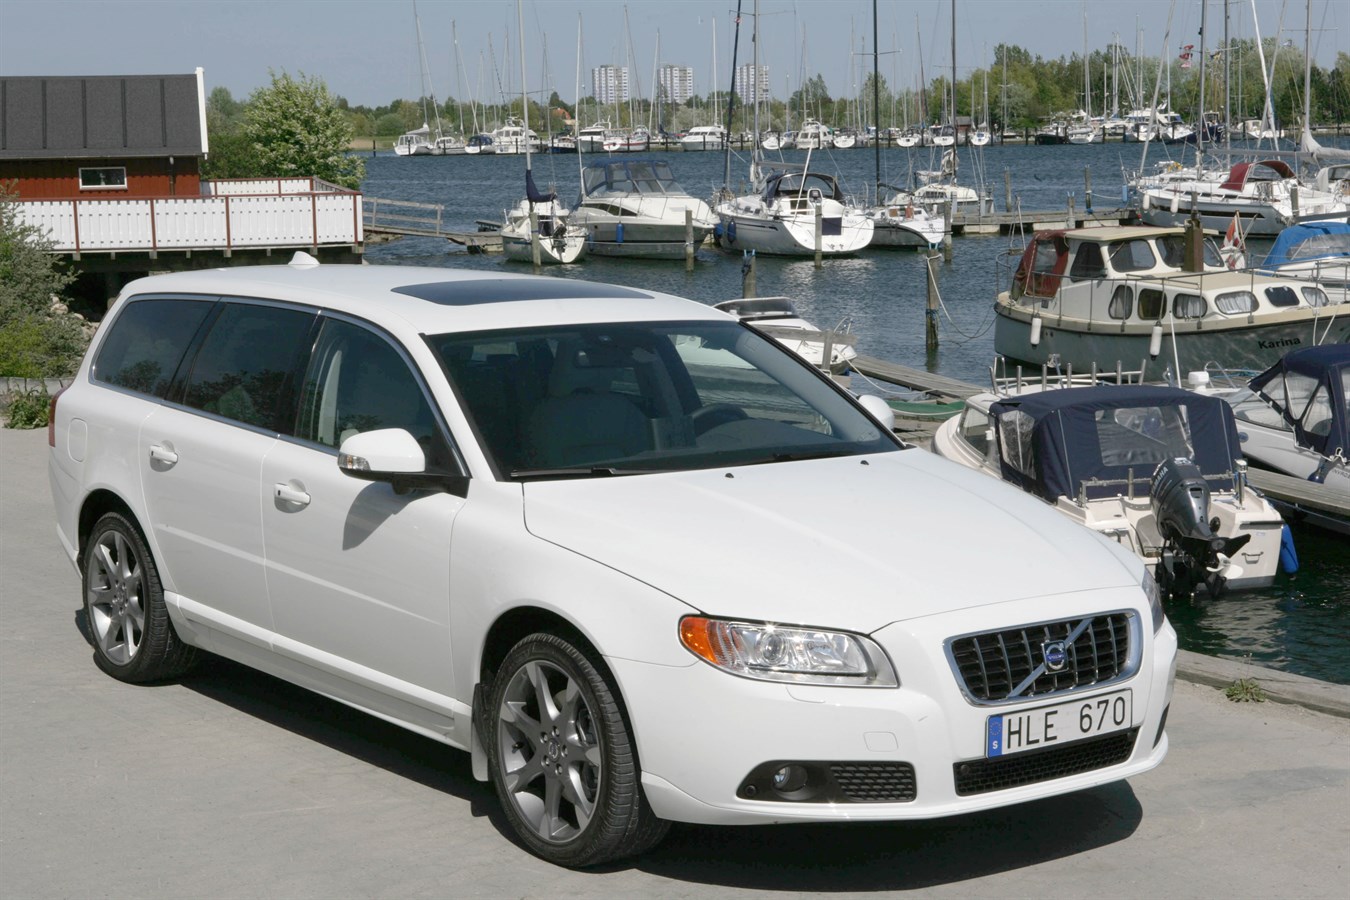 A Flexifuel engine with 200 hp (147kw), 2.5 litre turbo is available in Volvo V70 and S80 - responsibility for the environment with extra power.